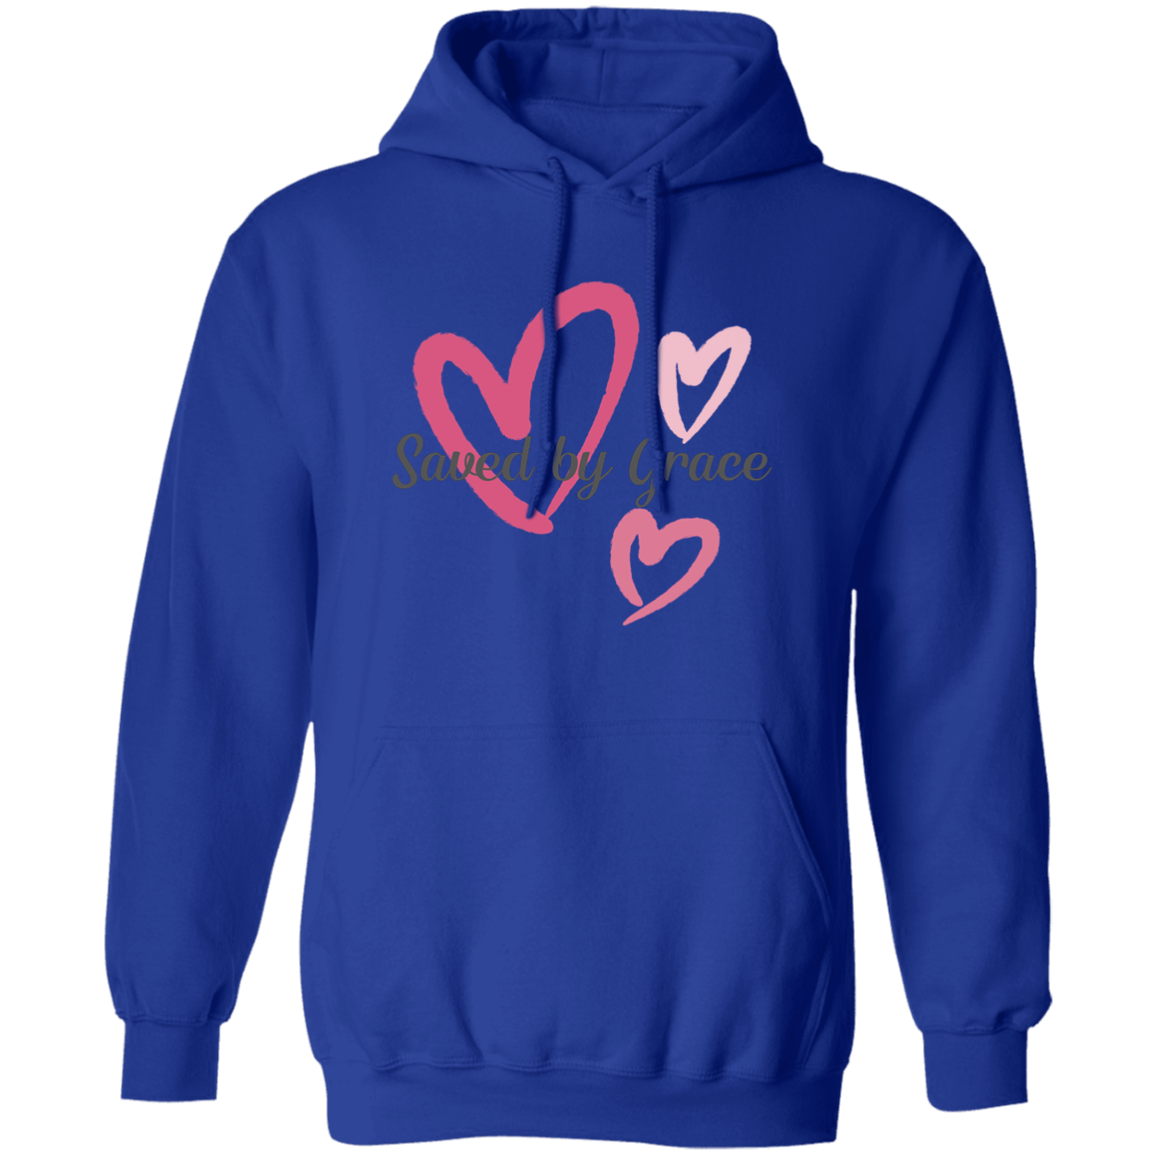 Saved by Grace Pullover Hoodie